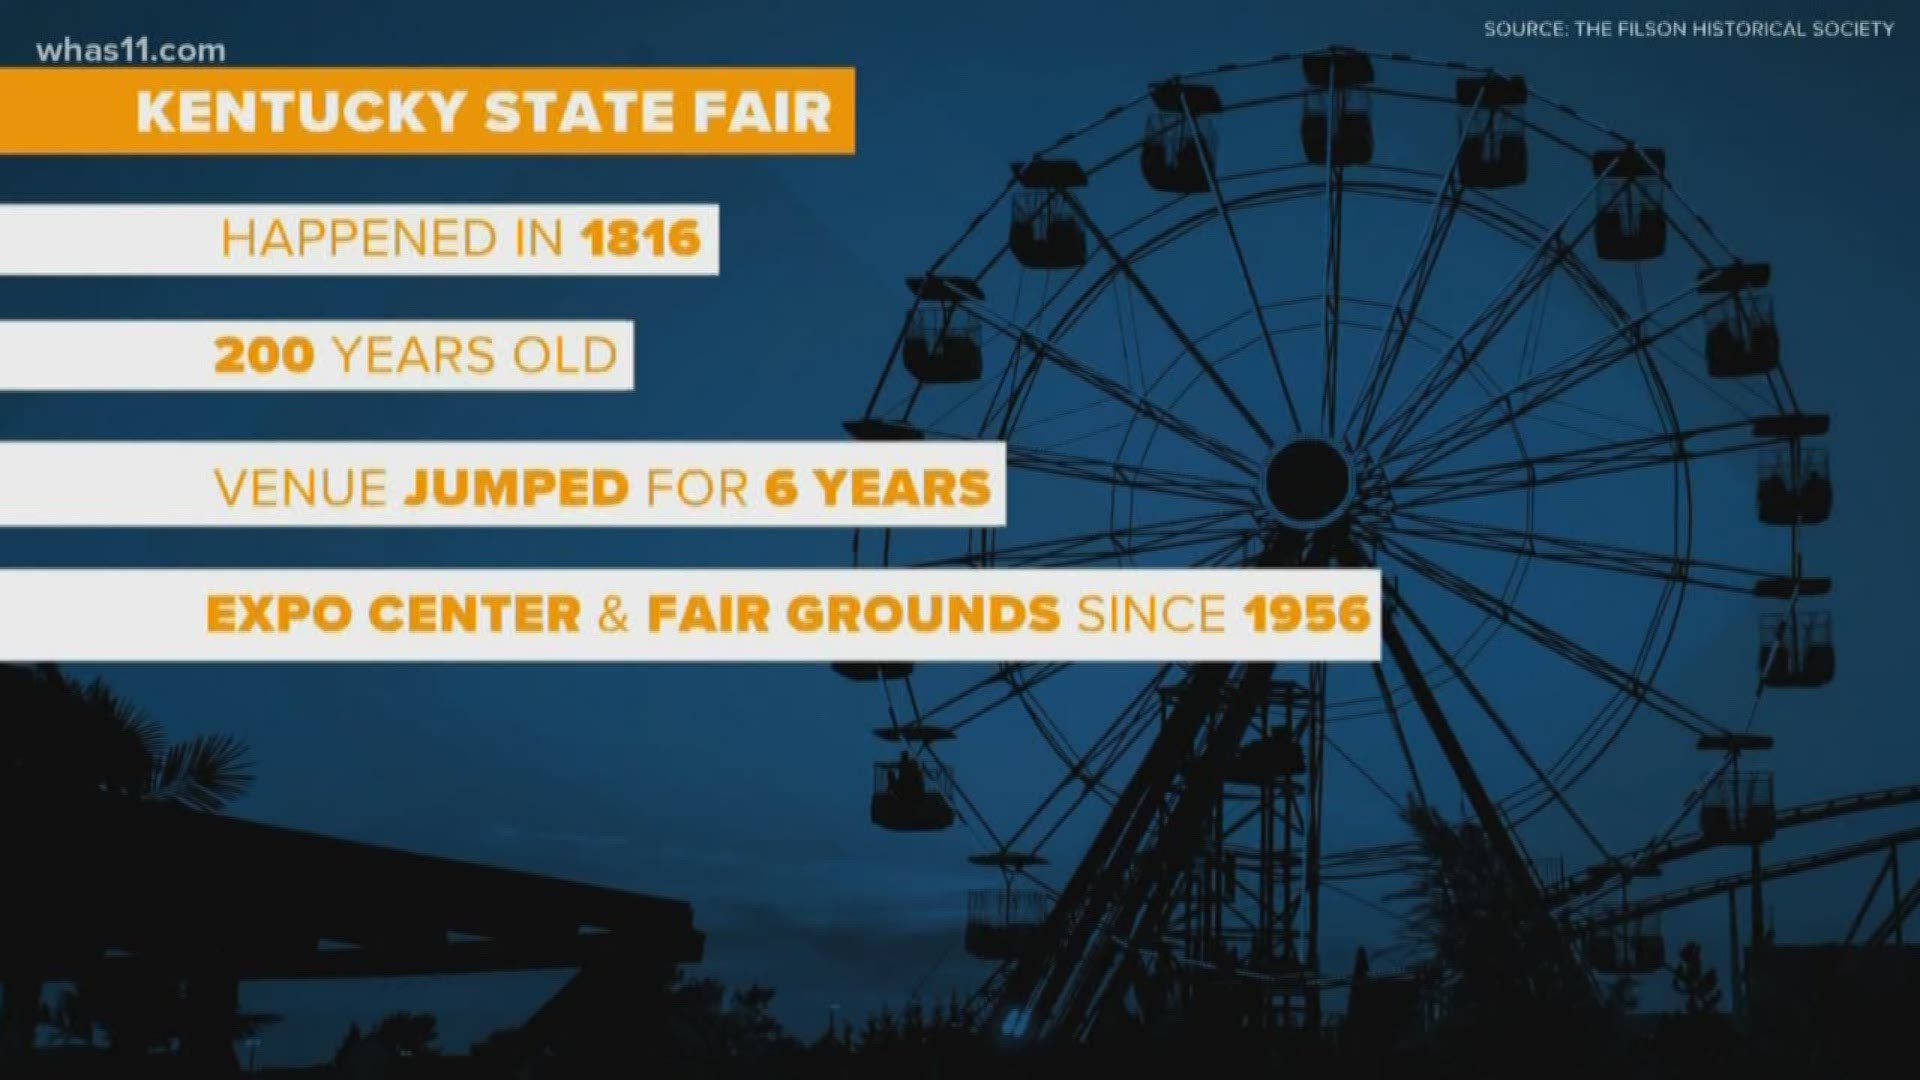 The first official Kentucky State Fair did not happen until 1902, but its history goes back even further.